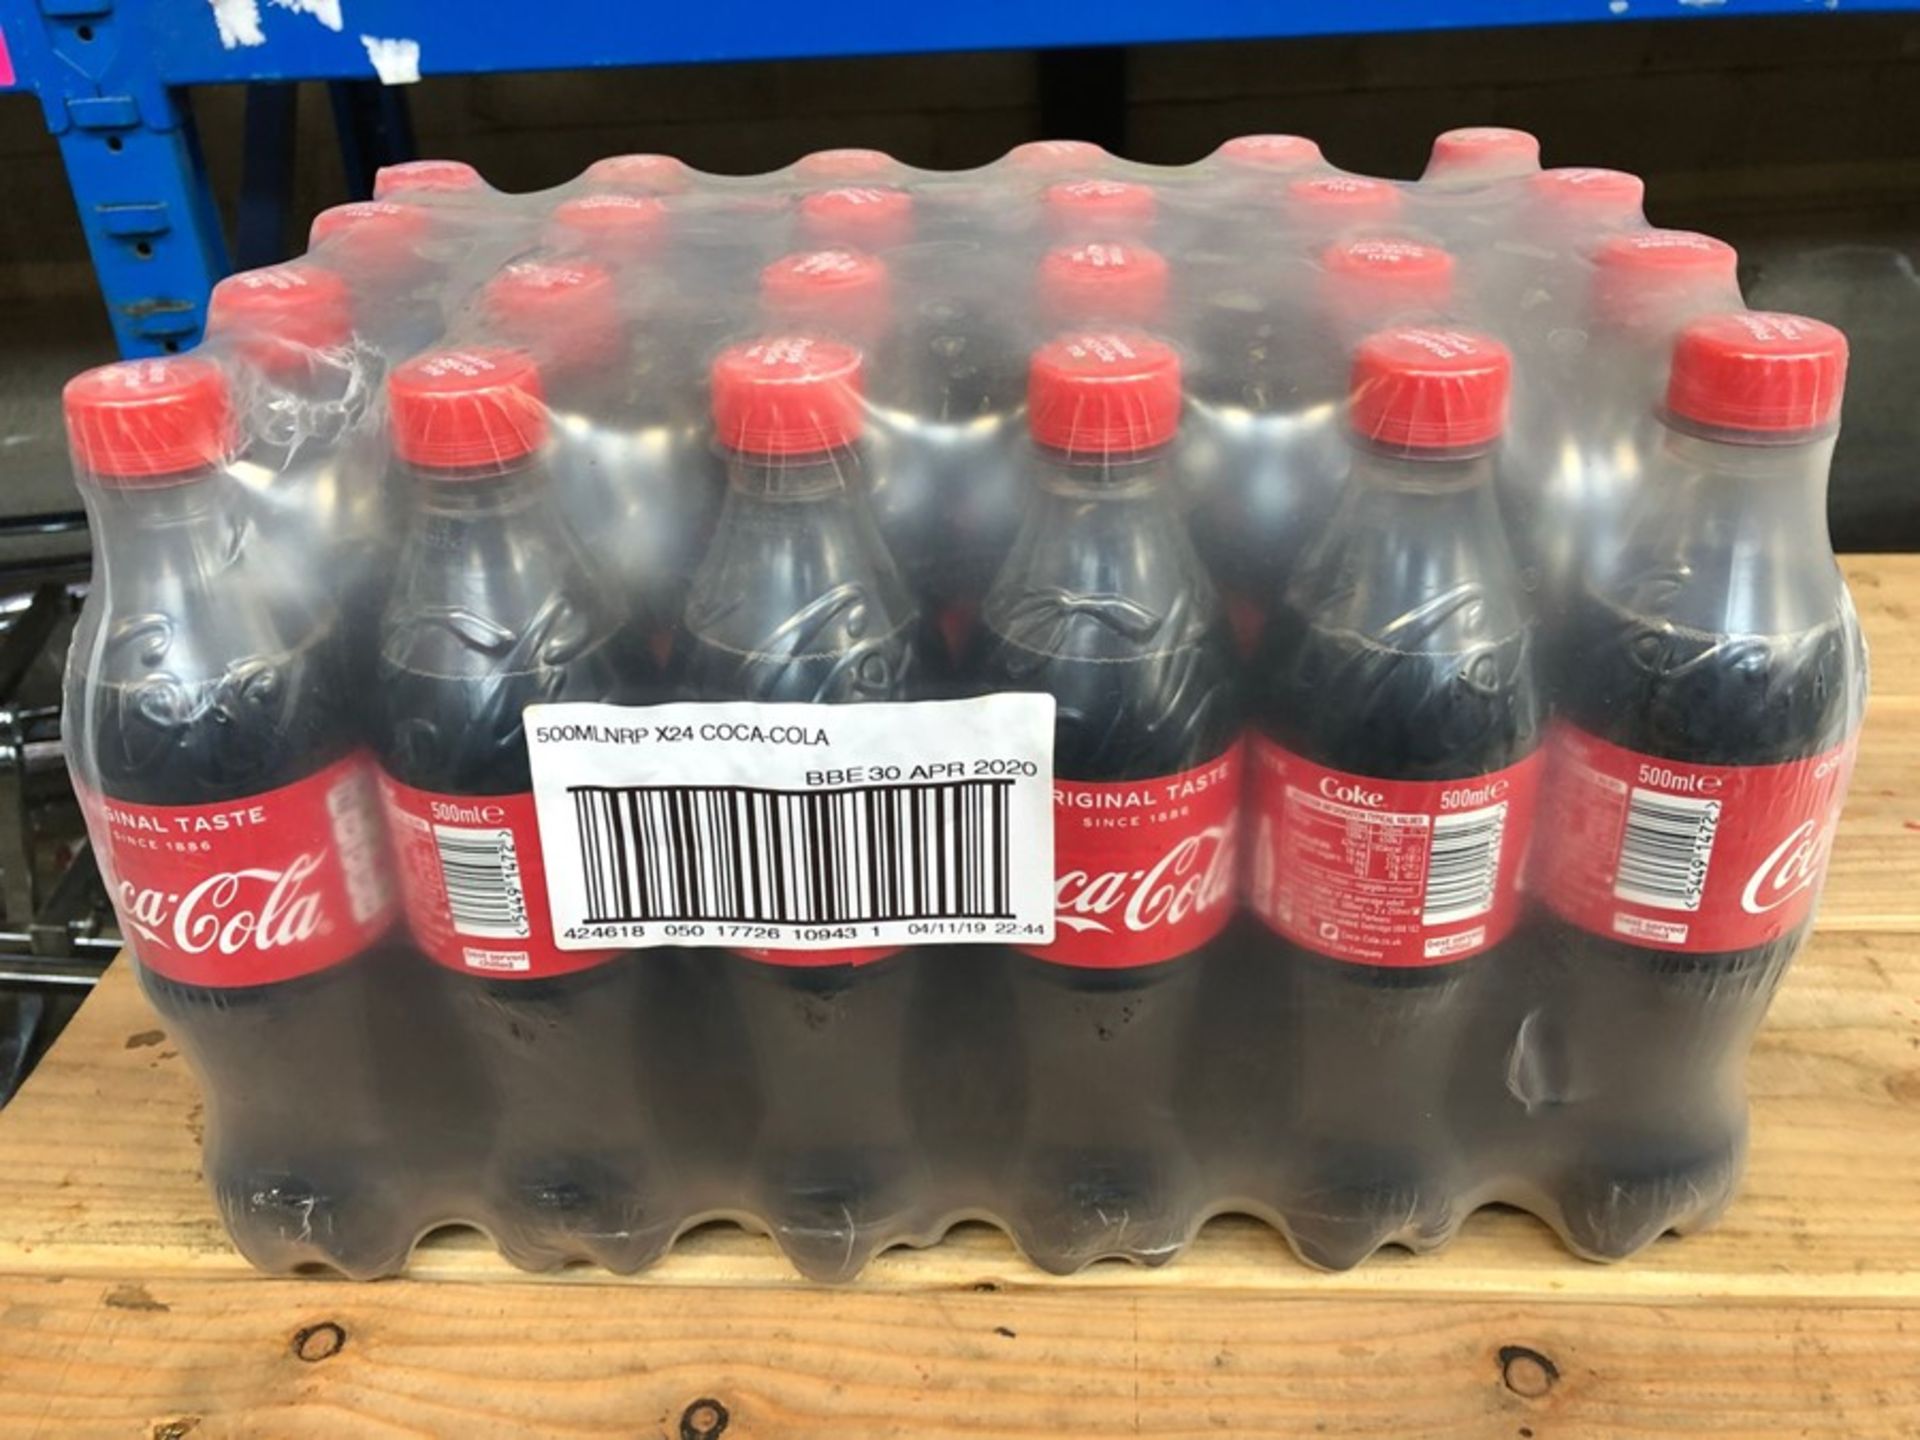 1 LOT TO CONTAIN 2 CASES X 24 500ML BOTTLES OF COCA-COLA B/B 30/04/2020